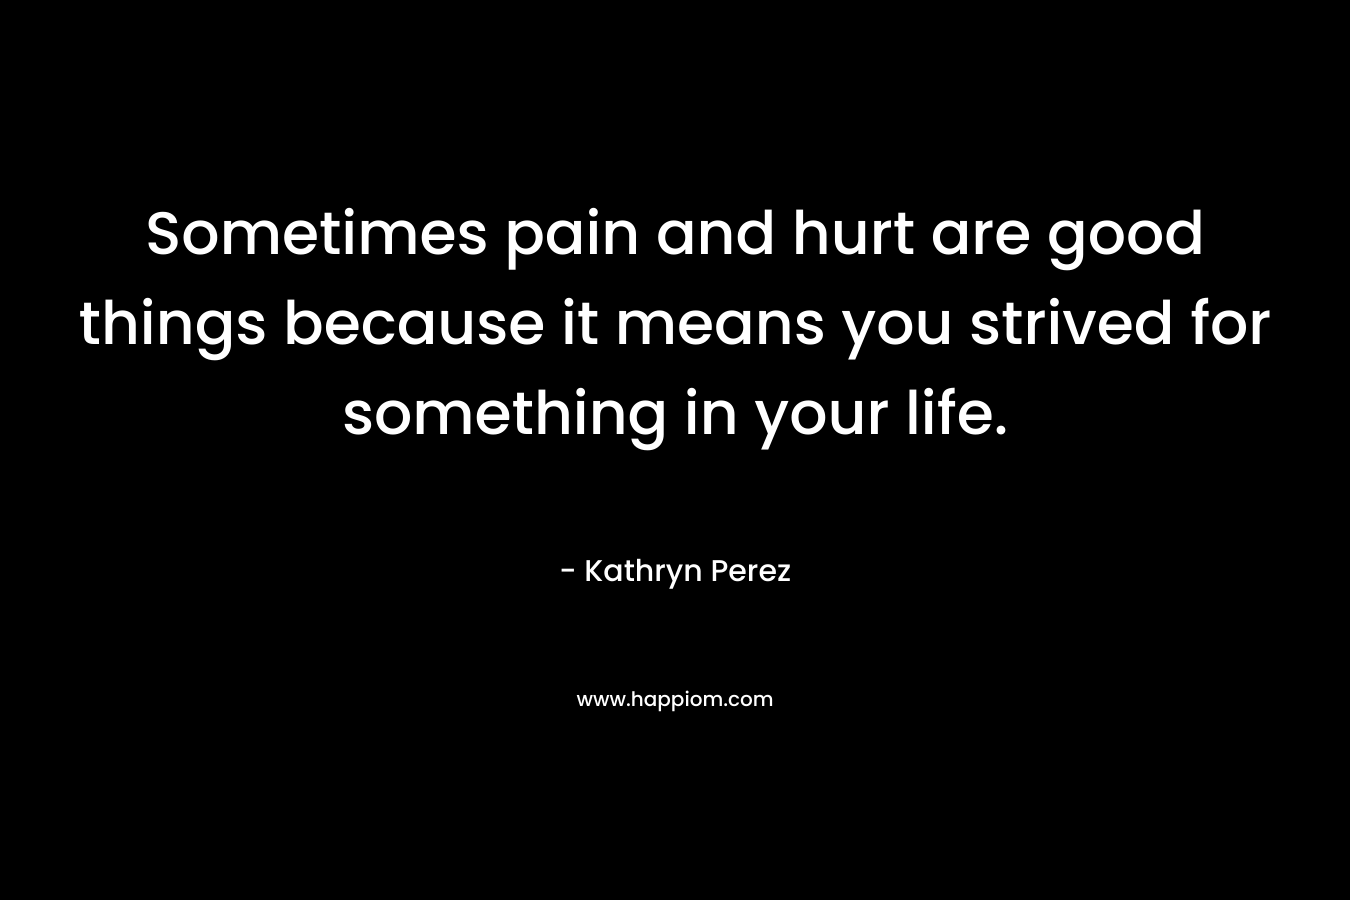 Sometimes pain and hurt are good things because it means you strived for something in your life.